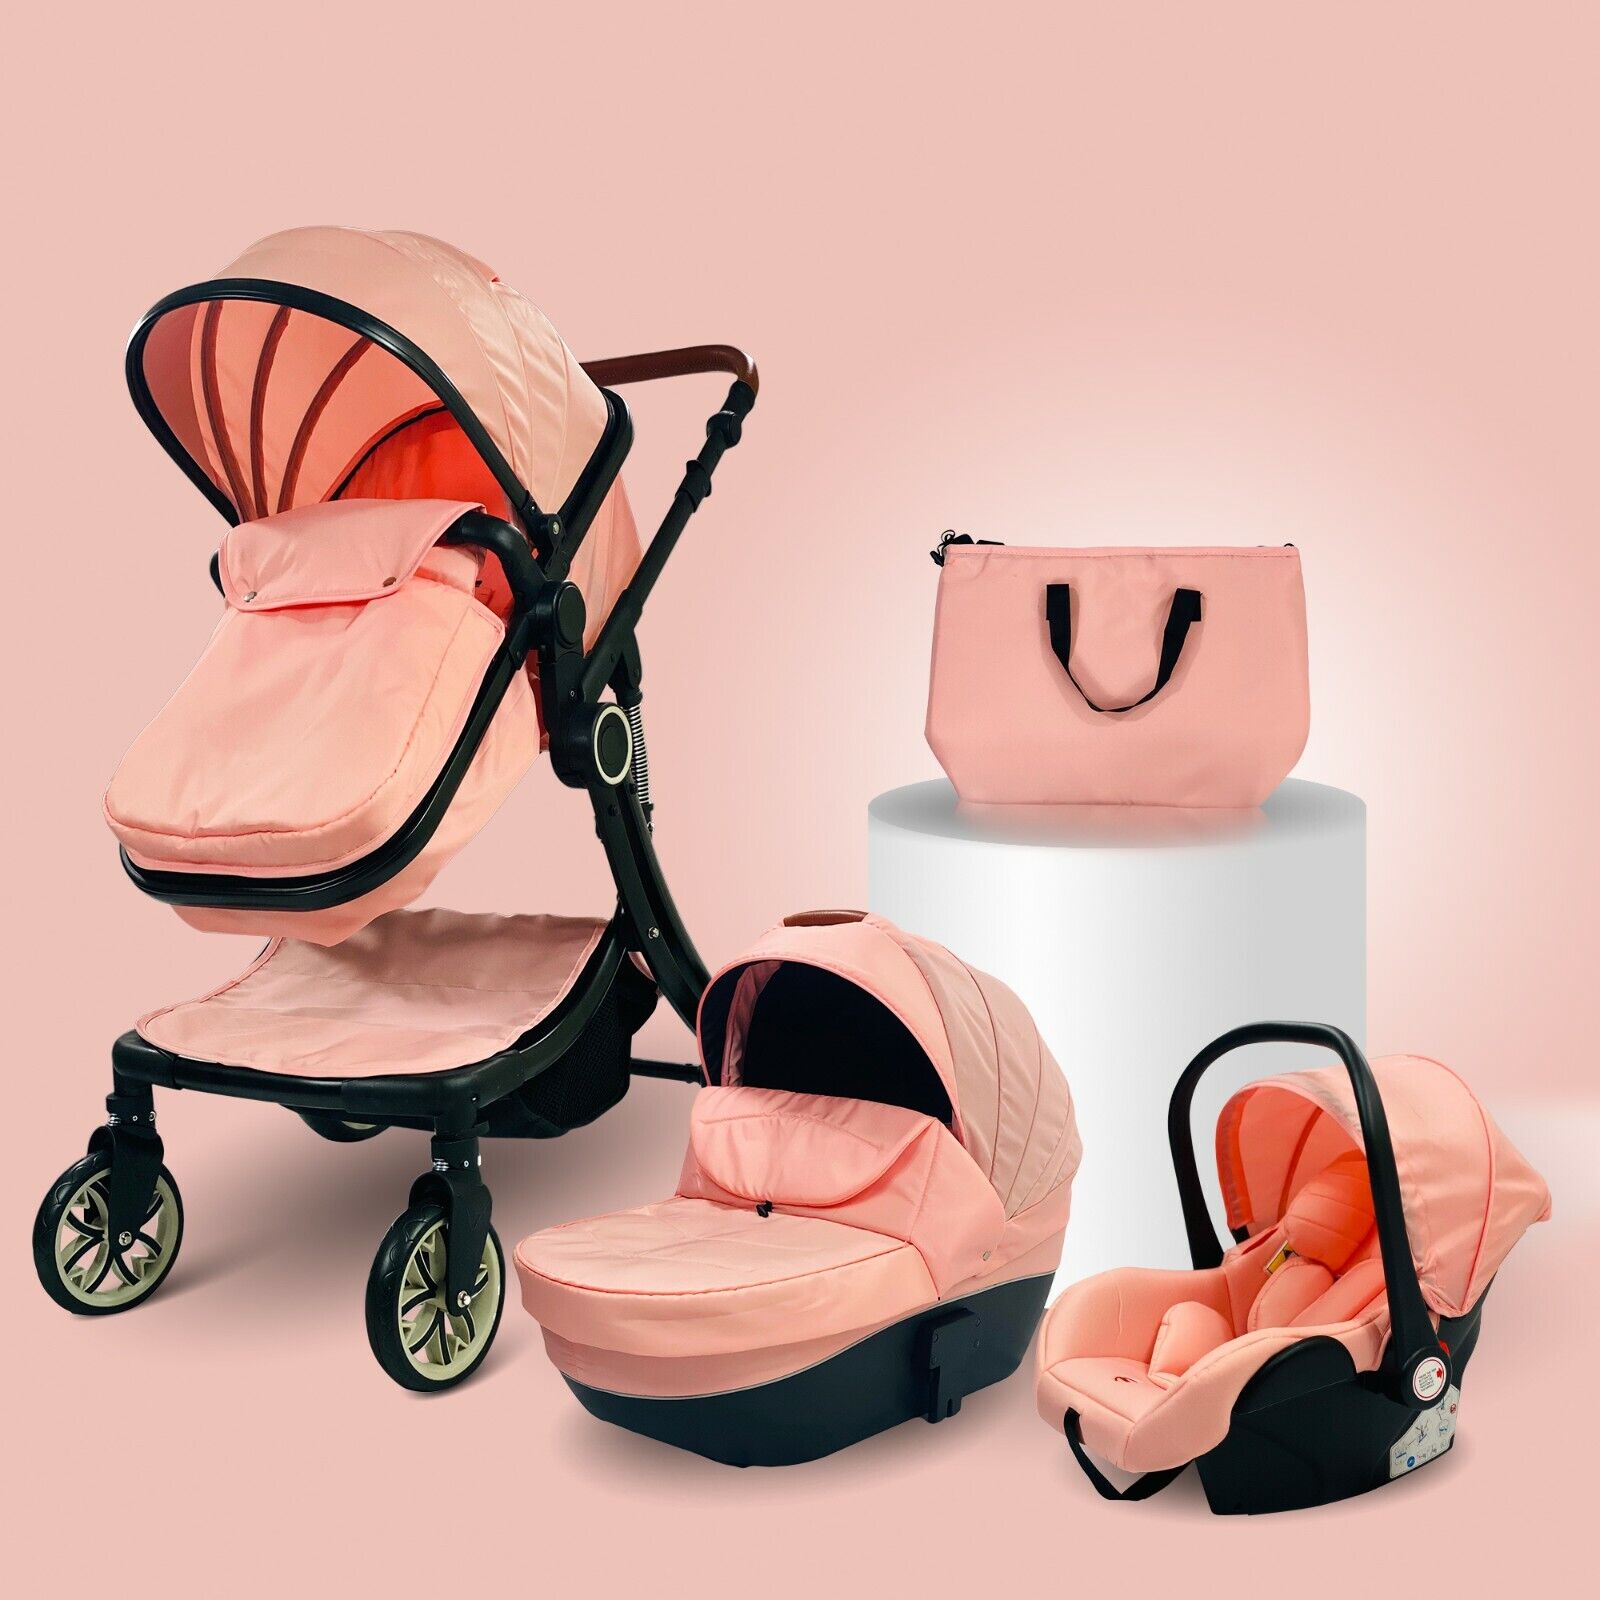 3 in 1 Baby stroller infant carseat bassinet carriage carriola light weight